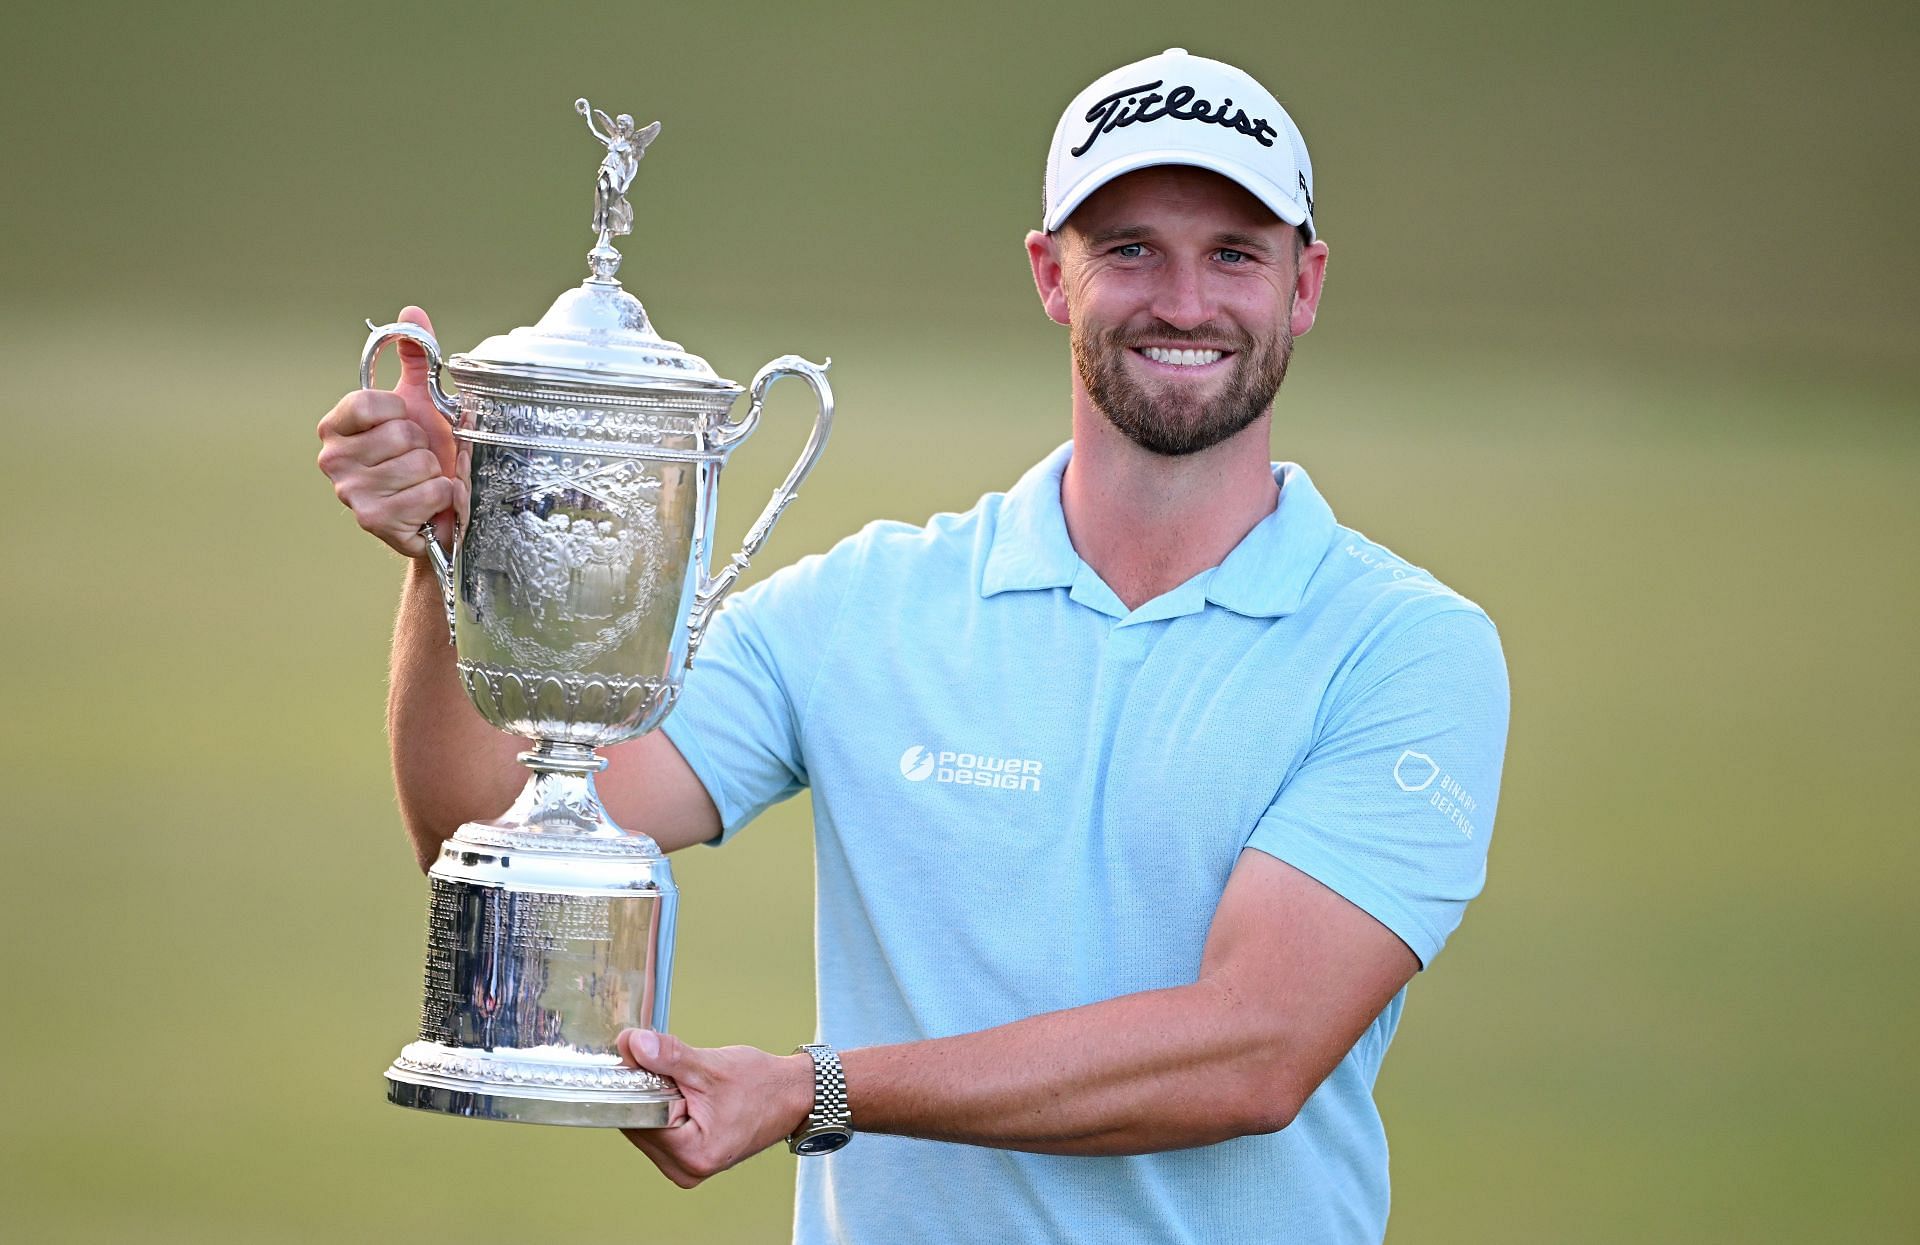 Wyndham Clark poses with the trophy after winning the US Open Championship 2023